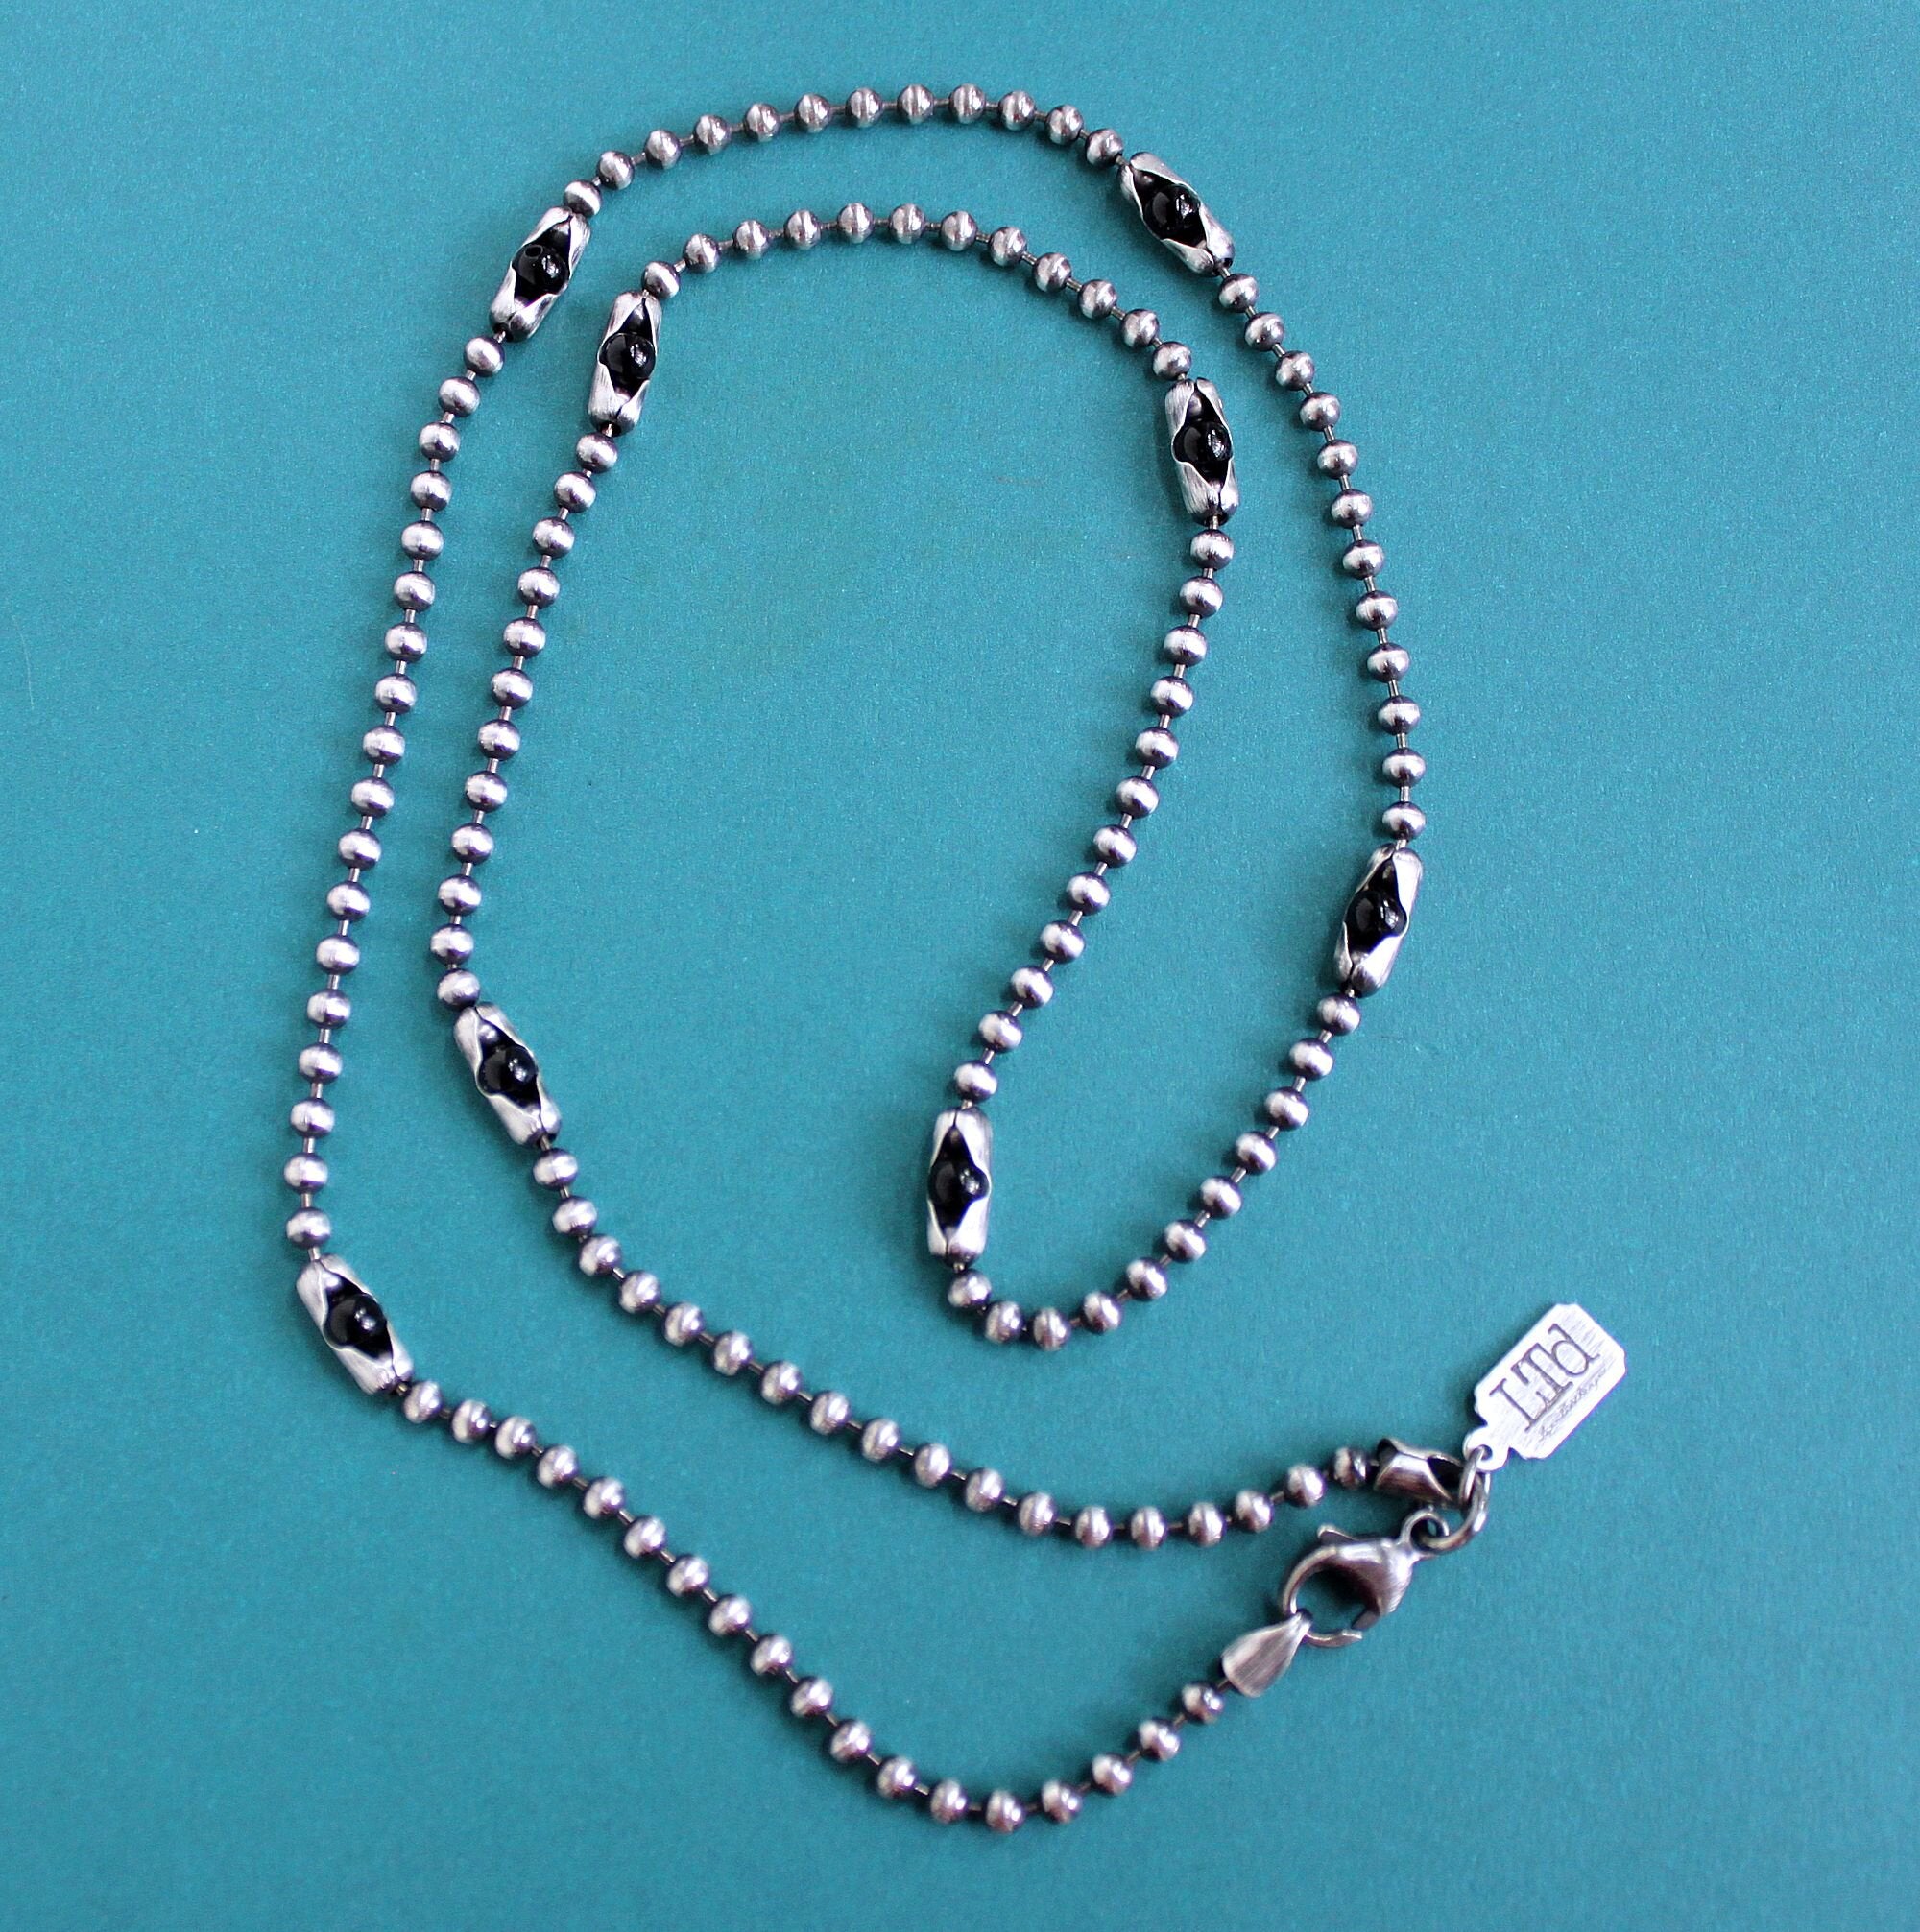 Buy Silver Onyx Necklace, Mens Necklace Onyx Stone Pendant Silver Chain Mens  Set 8mm Chain & Onyx Necklace for Mens by Twistedpendant Online in India -  Etsy